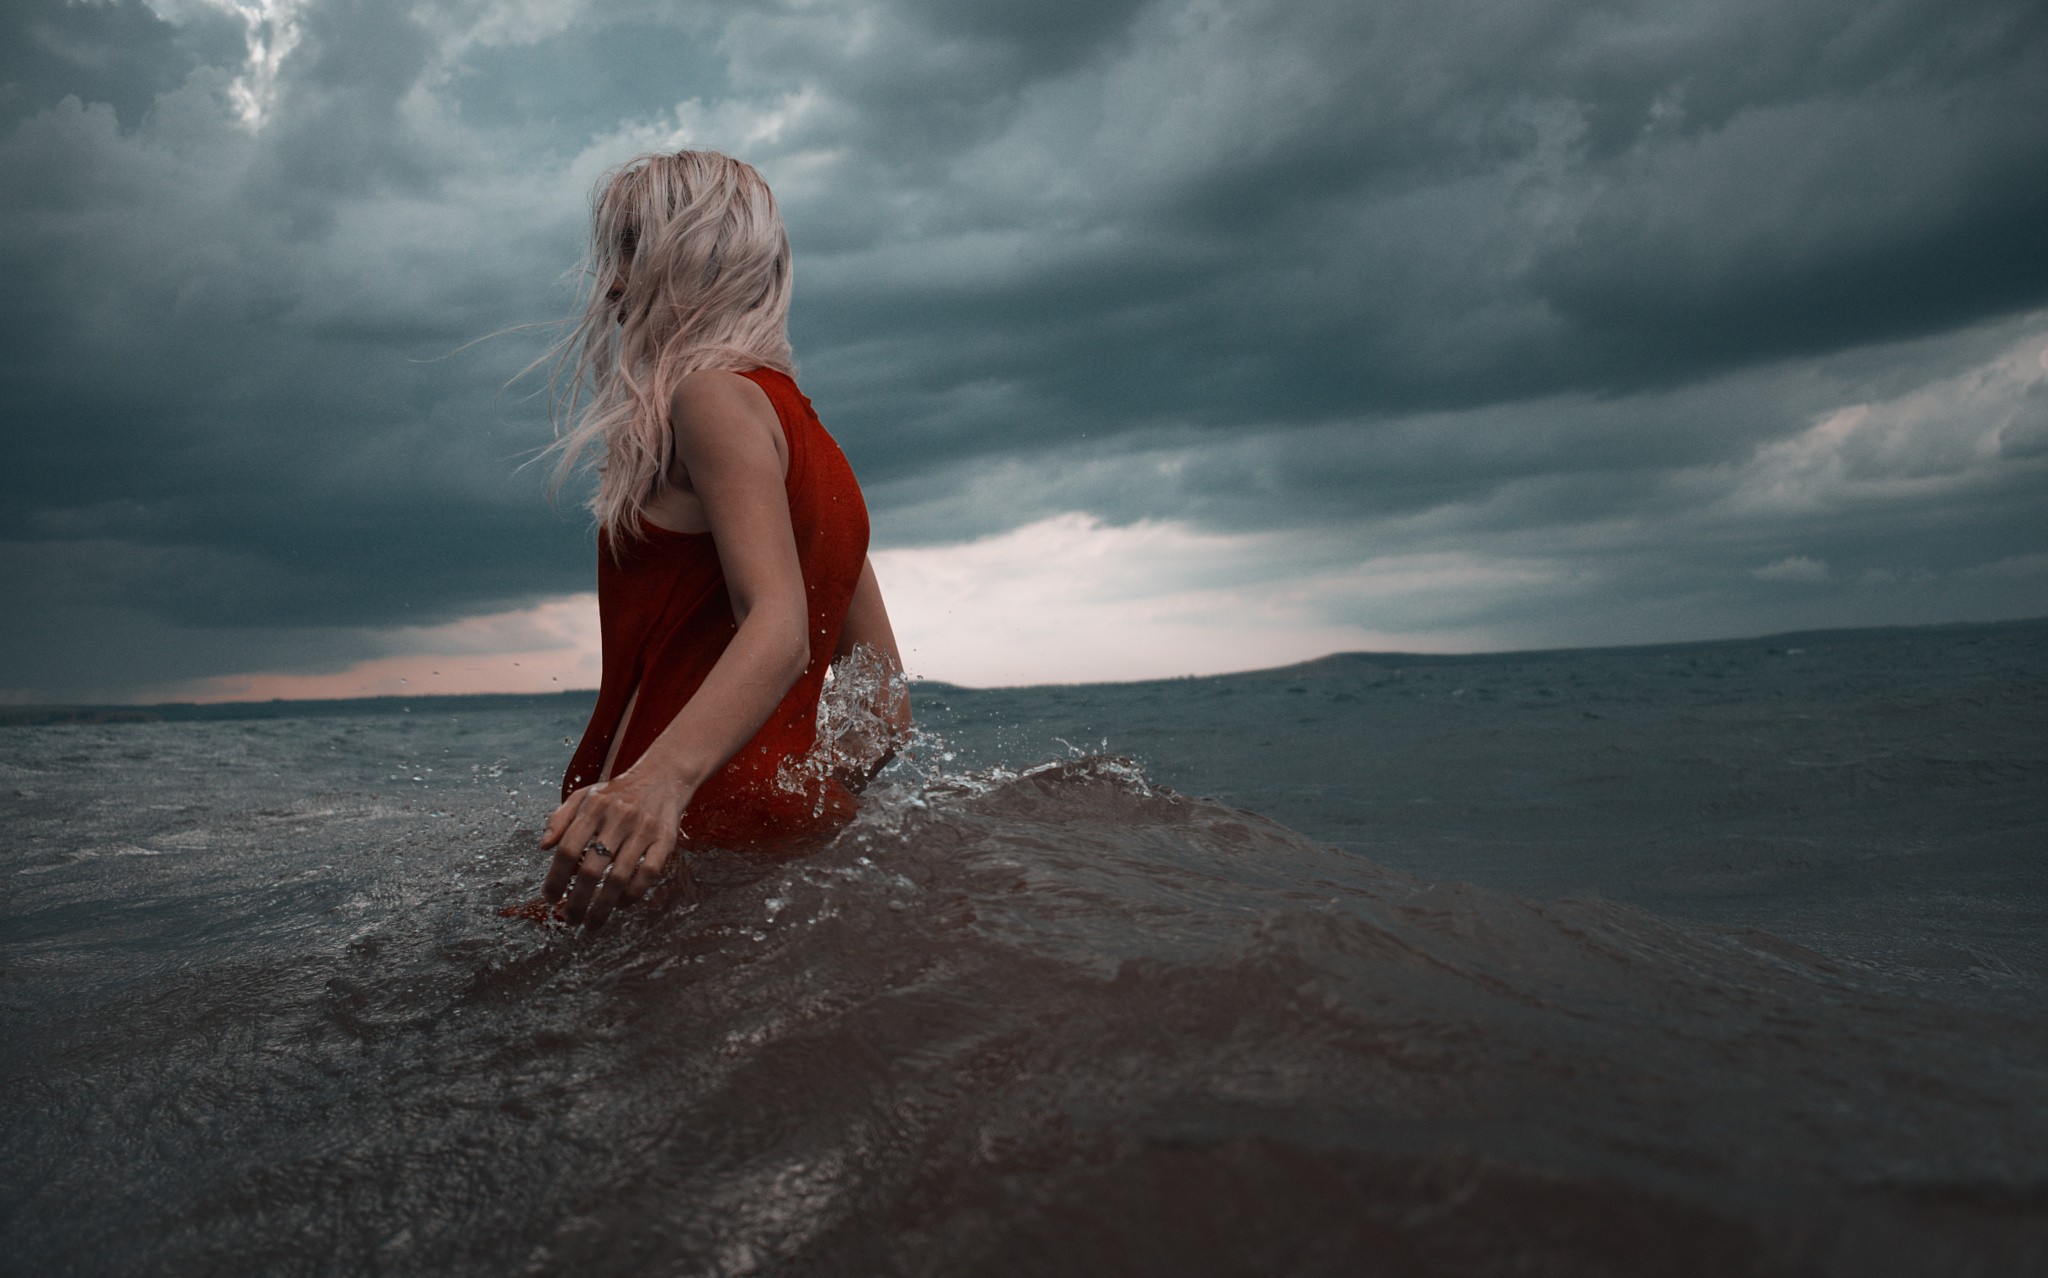 Women Blonde Windy Waves Clouds Storm Rear View Red Clothing Wet Roman Filippov 2048x1278